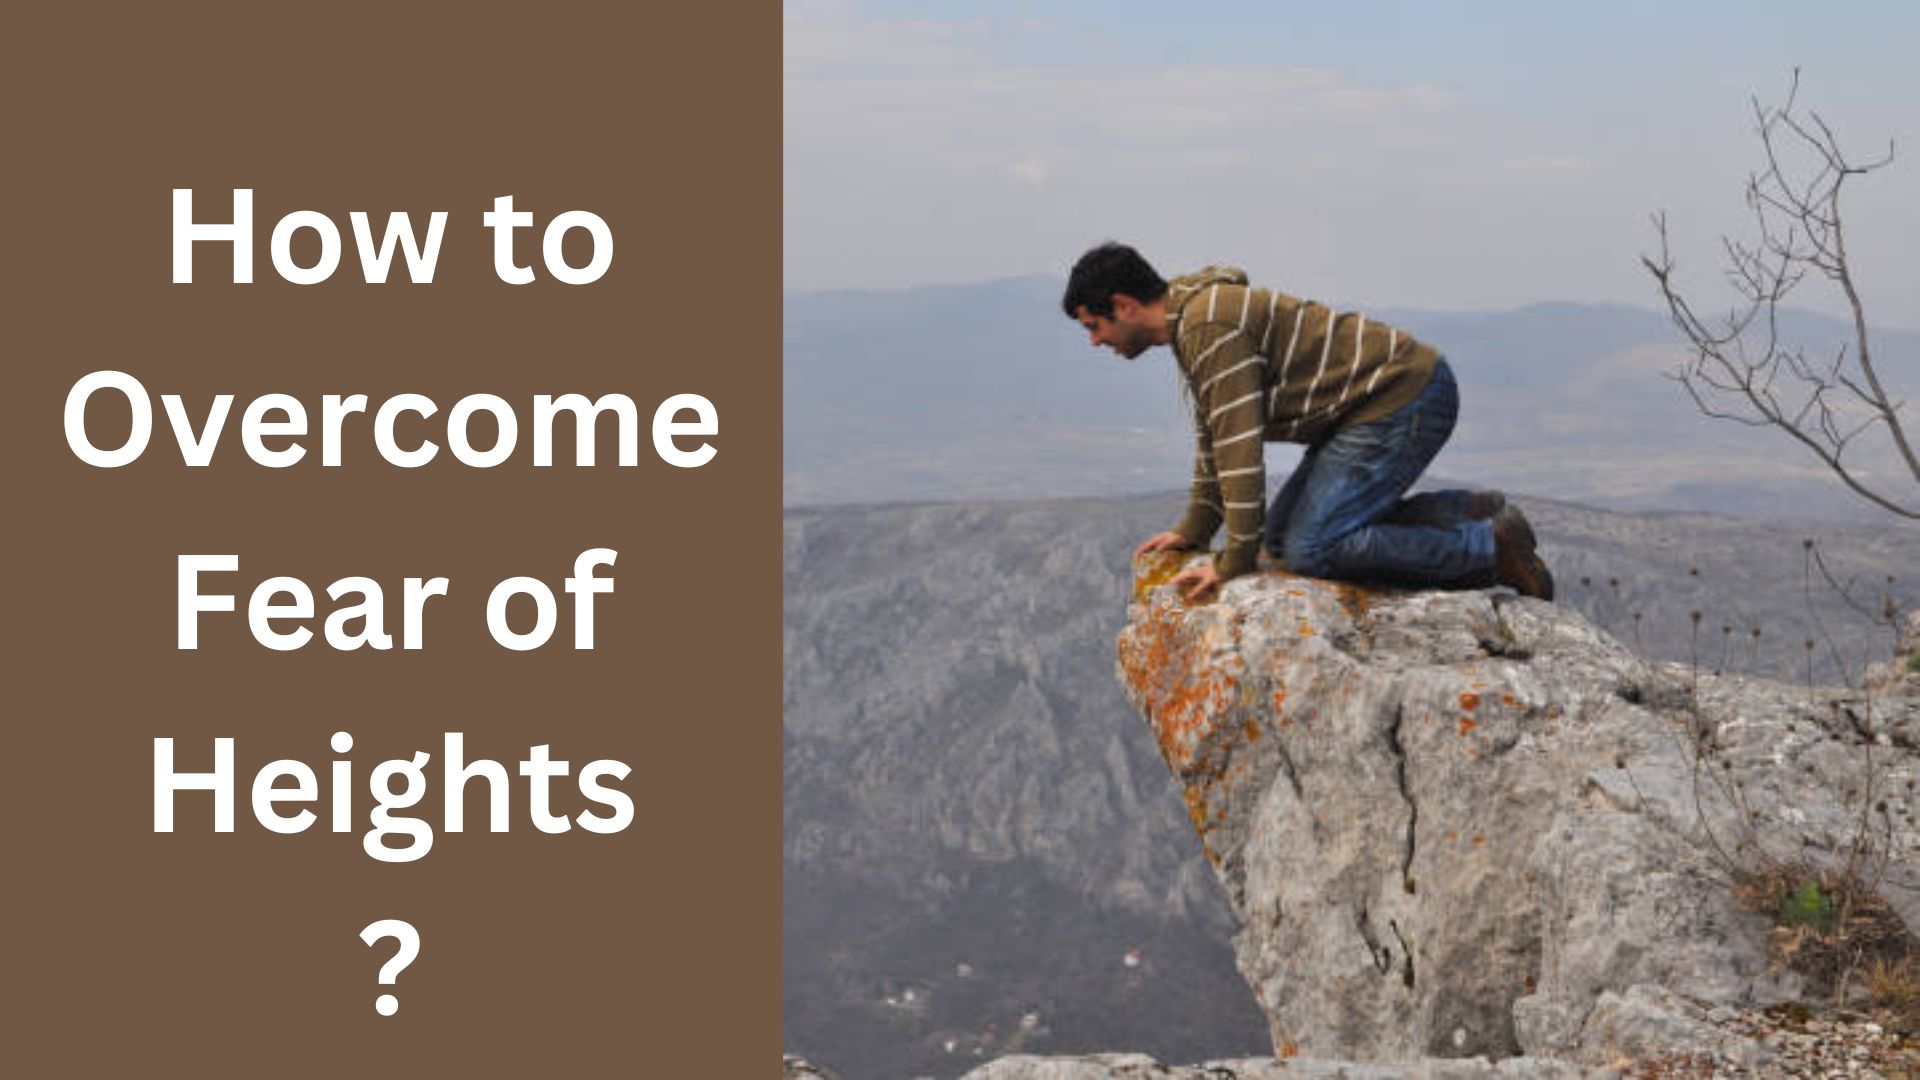 How to Overcome Fear of Heights